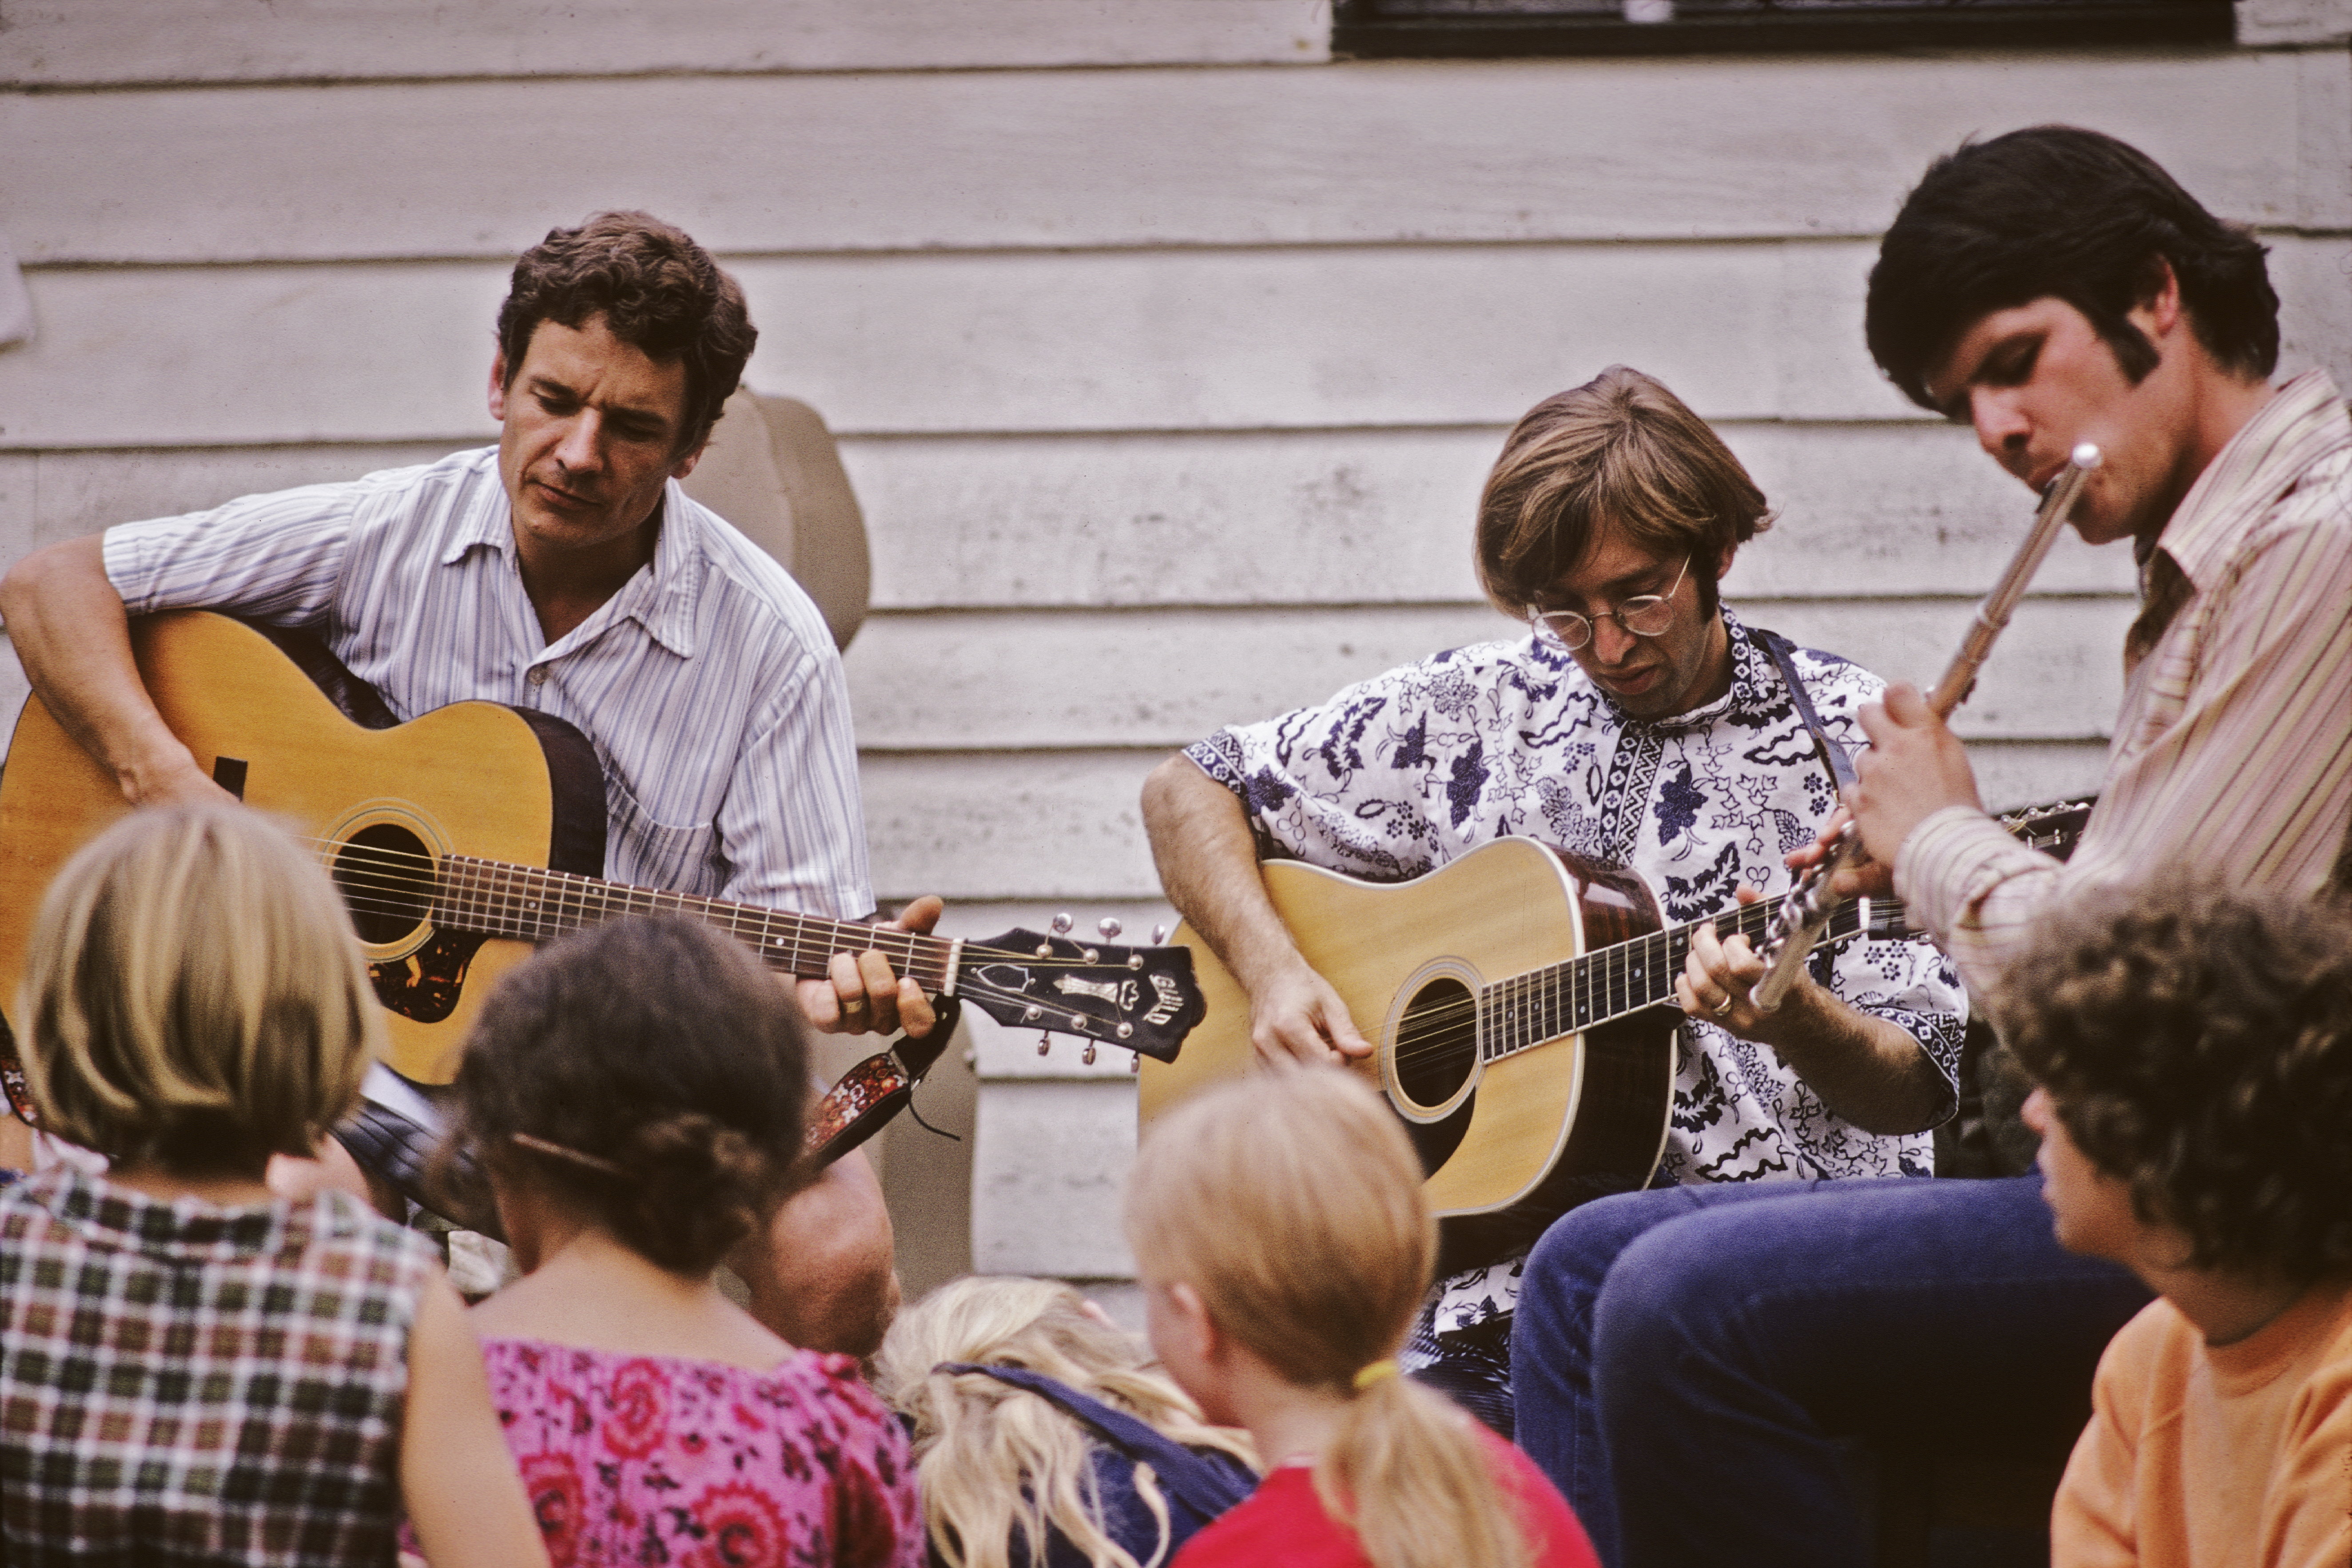 Hamid Hamilton Camp (with his Guild guitar), Waqidi Falicoff (with his 1968 Martin D12-35 12 string guitar), Loren Pickford (flute), Raphael Grinage (not seen to the left)